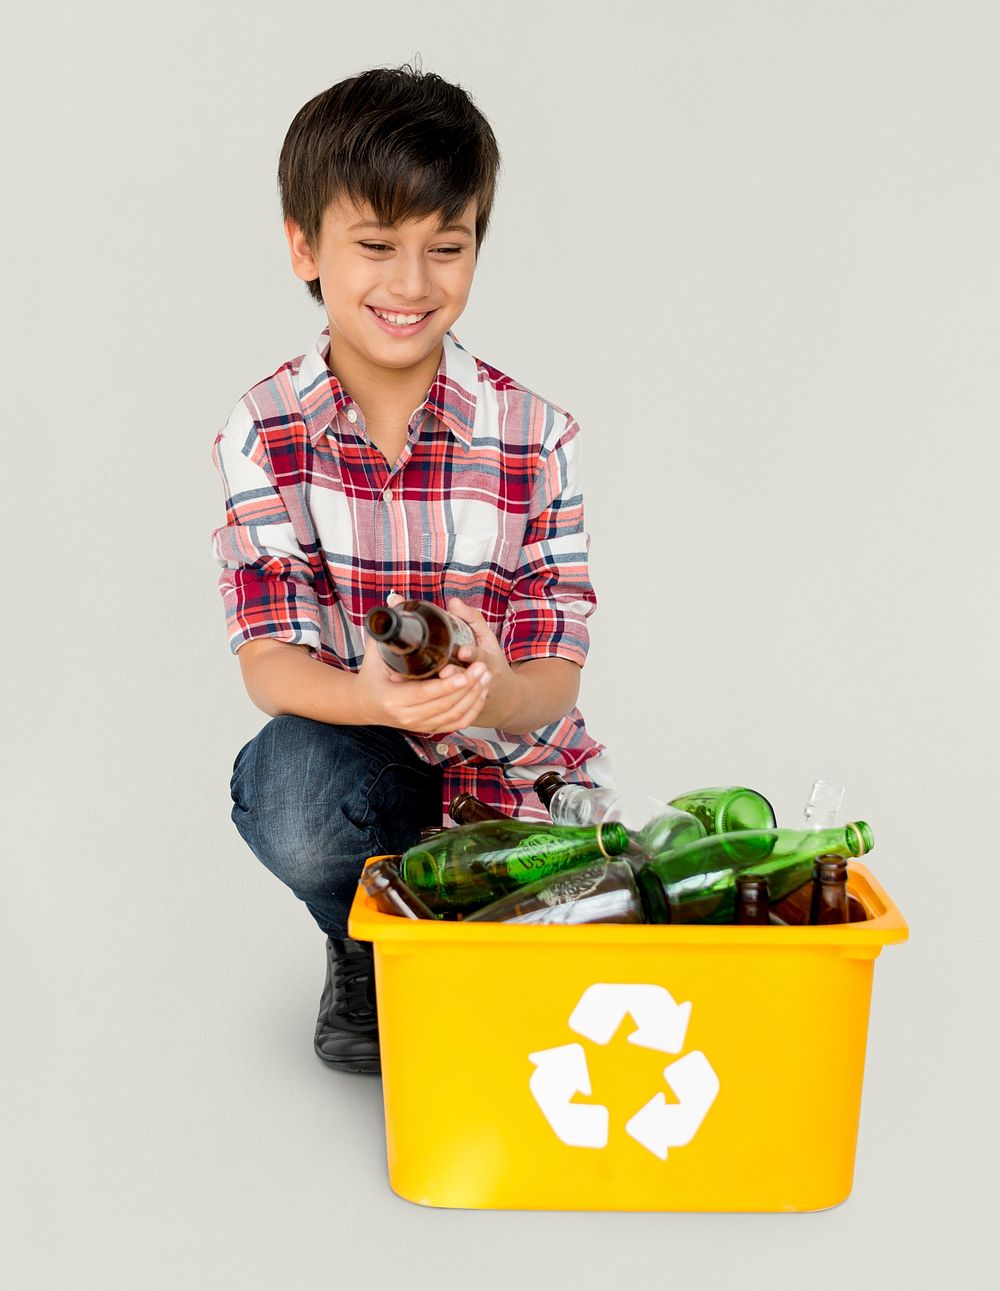 Young Boy Separating Recyclable Glass Bottles